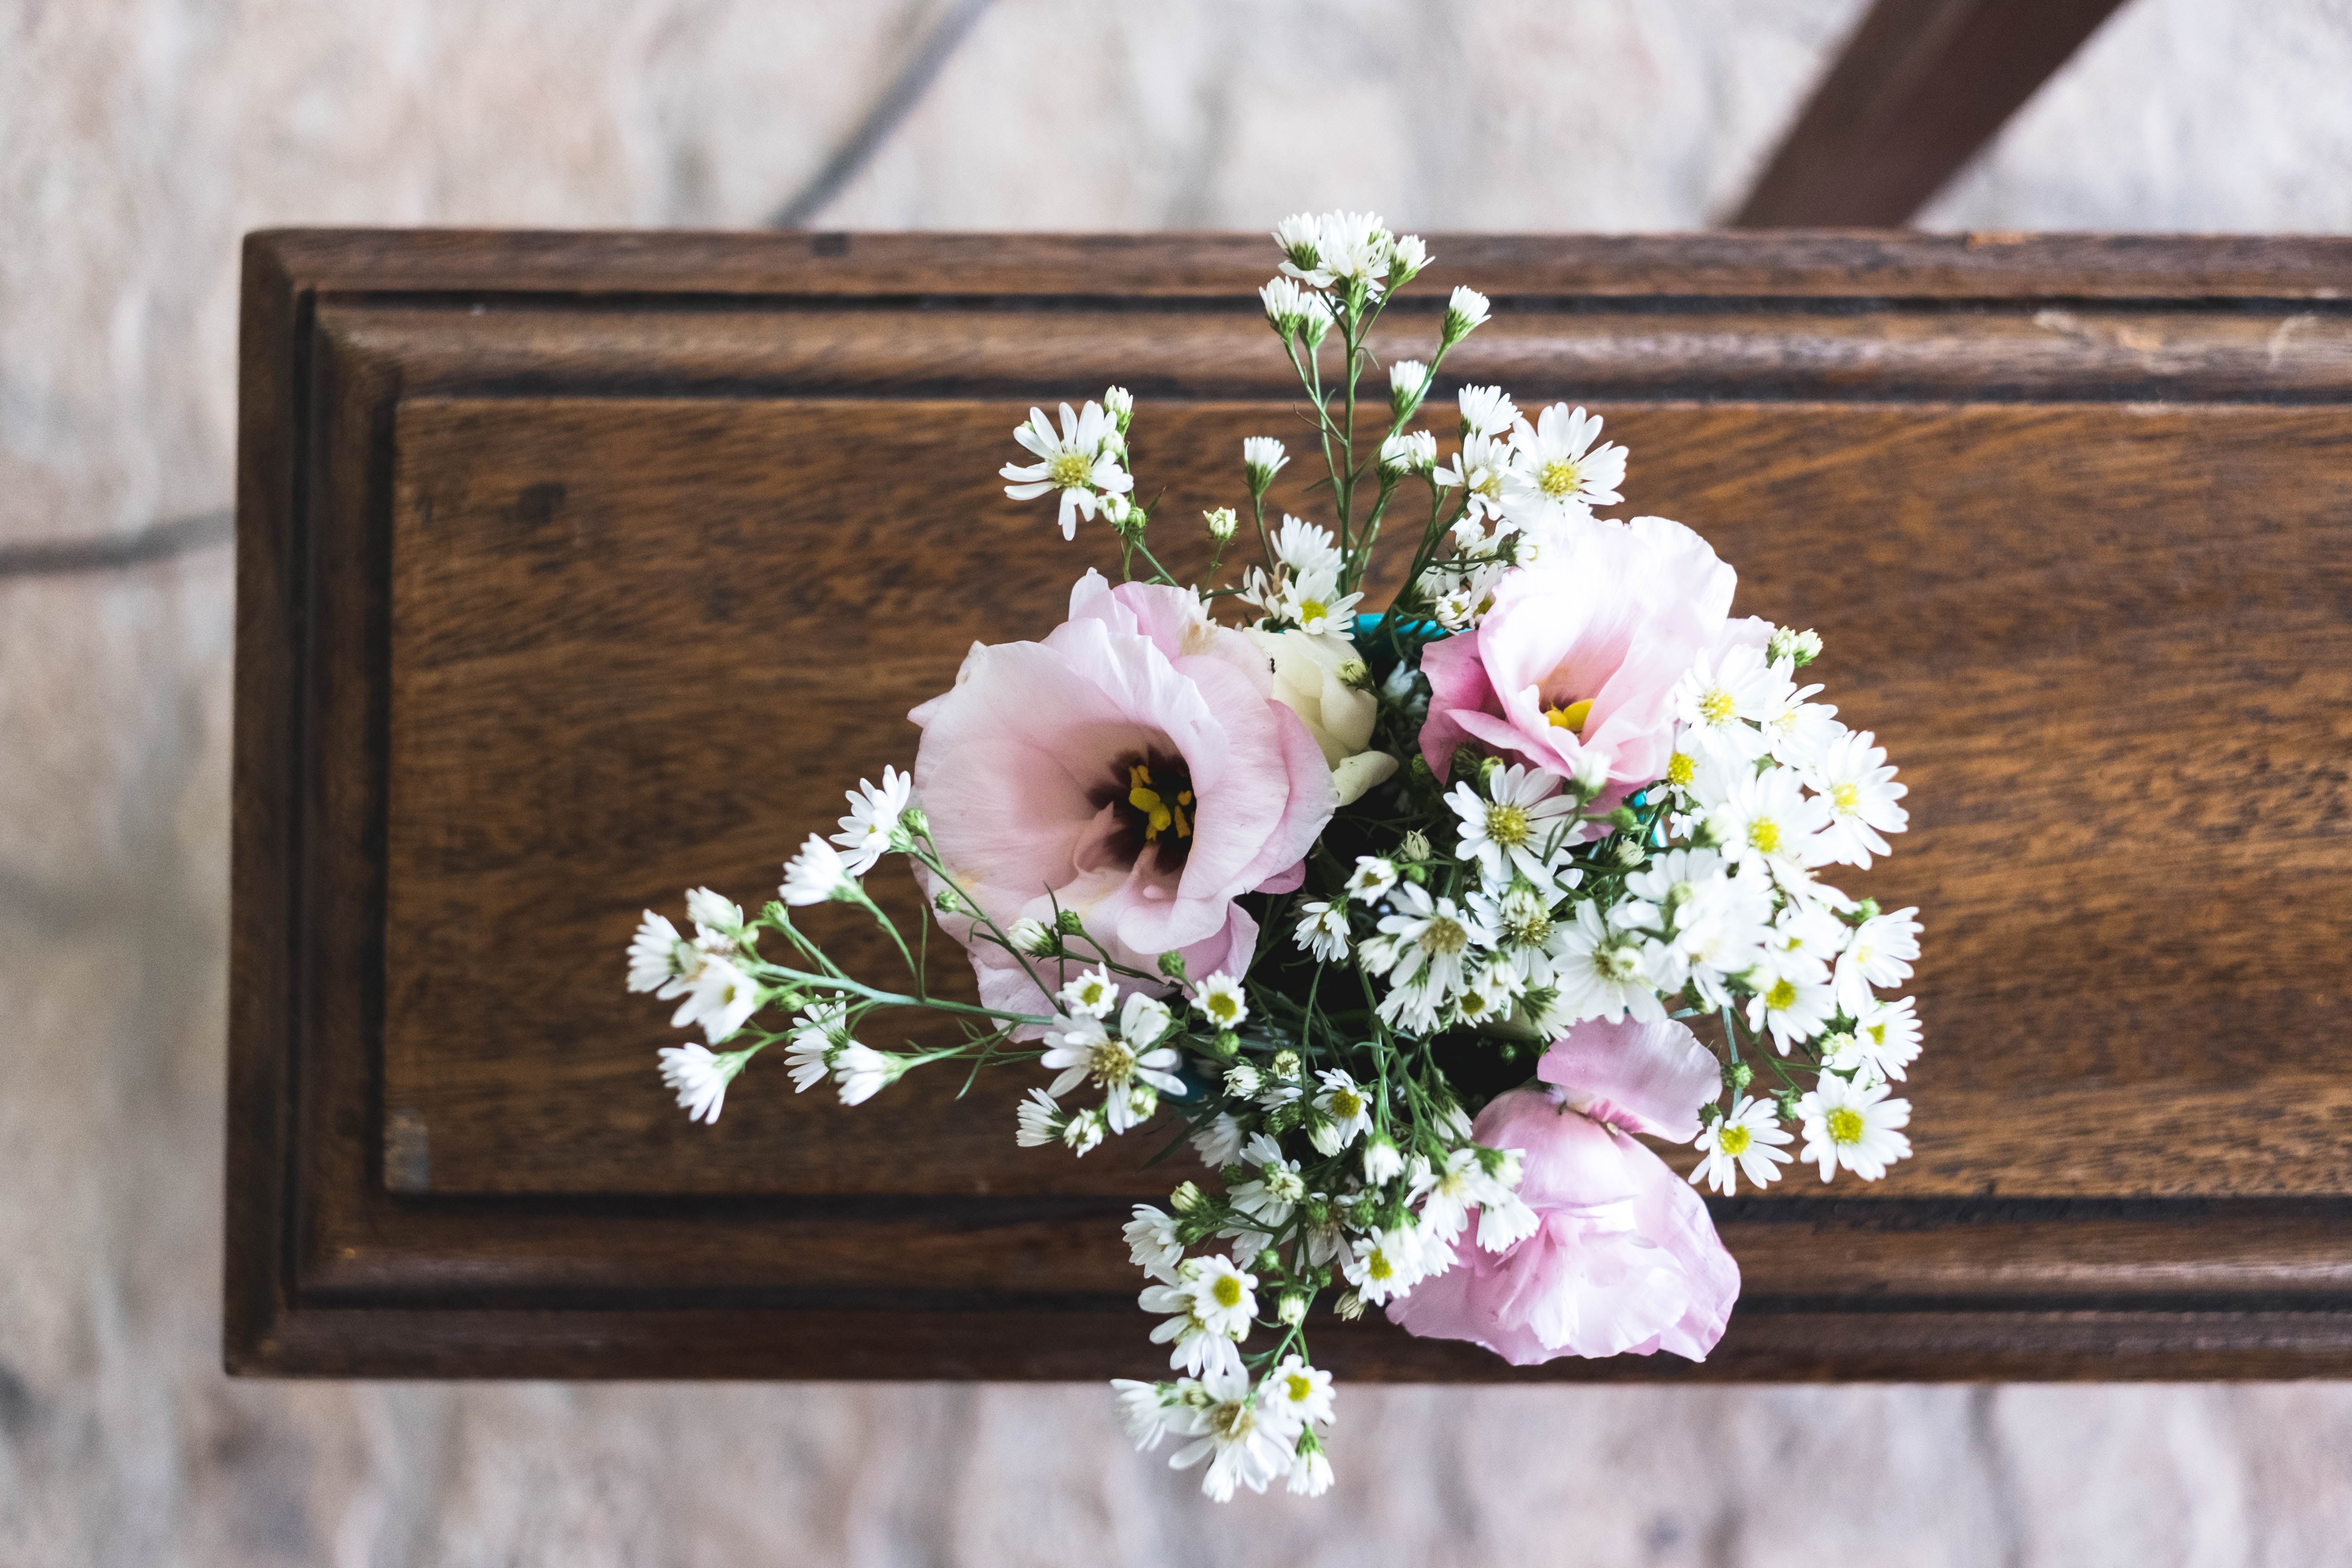 Flowers sit on top of a wooden casket.